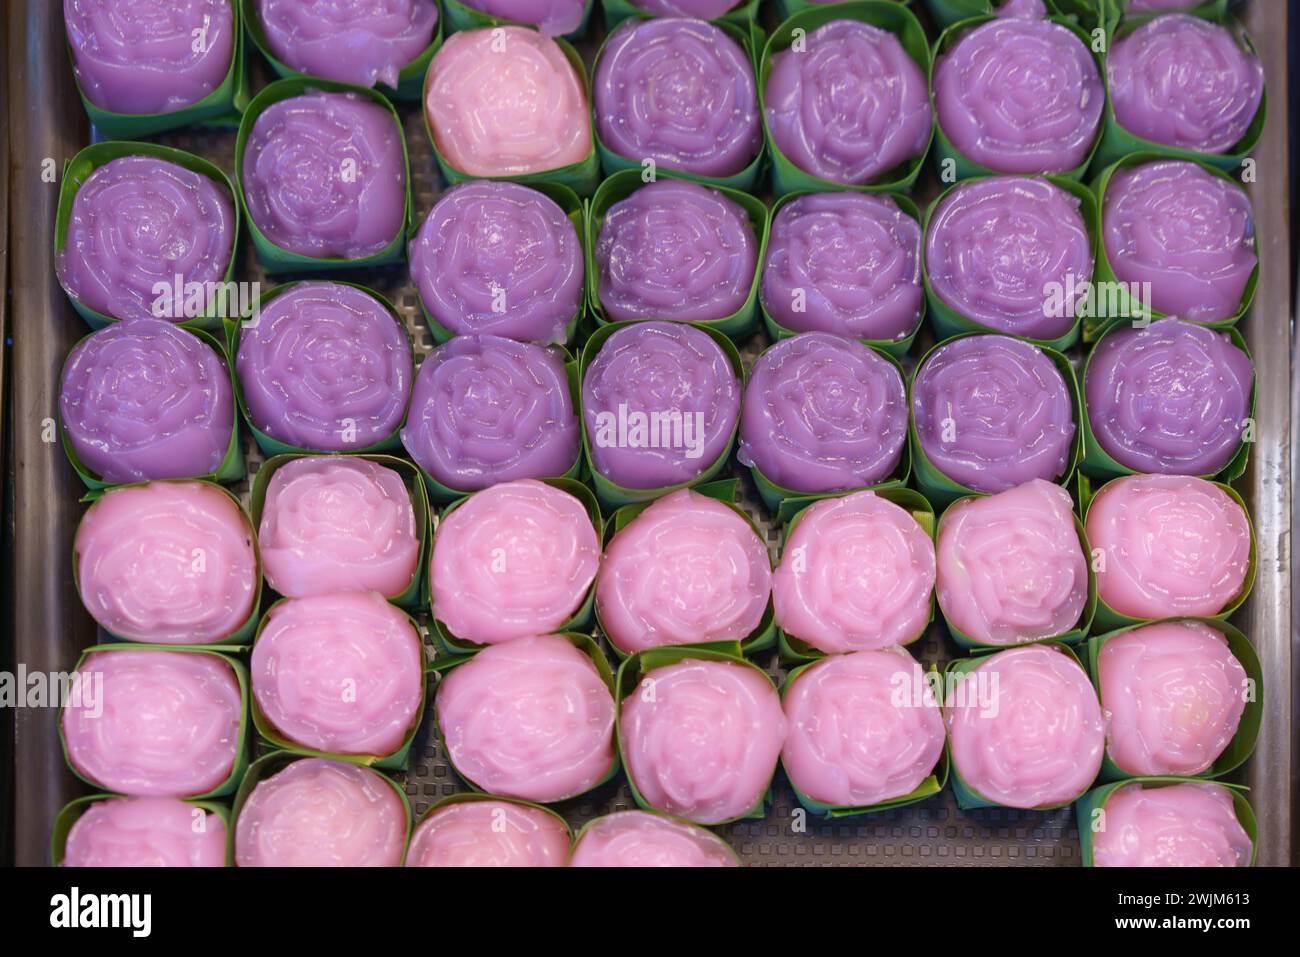 Steamed layer cake desserts crafted into flower shapes, presented in banana leaf cups, displaying an array of pink and purple colors Stock Photo